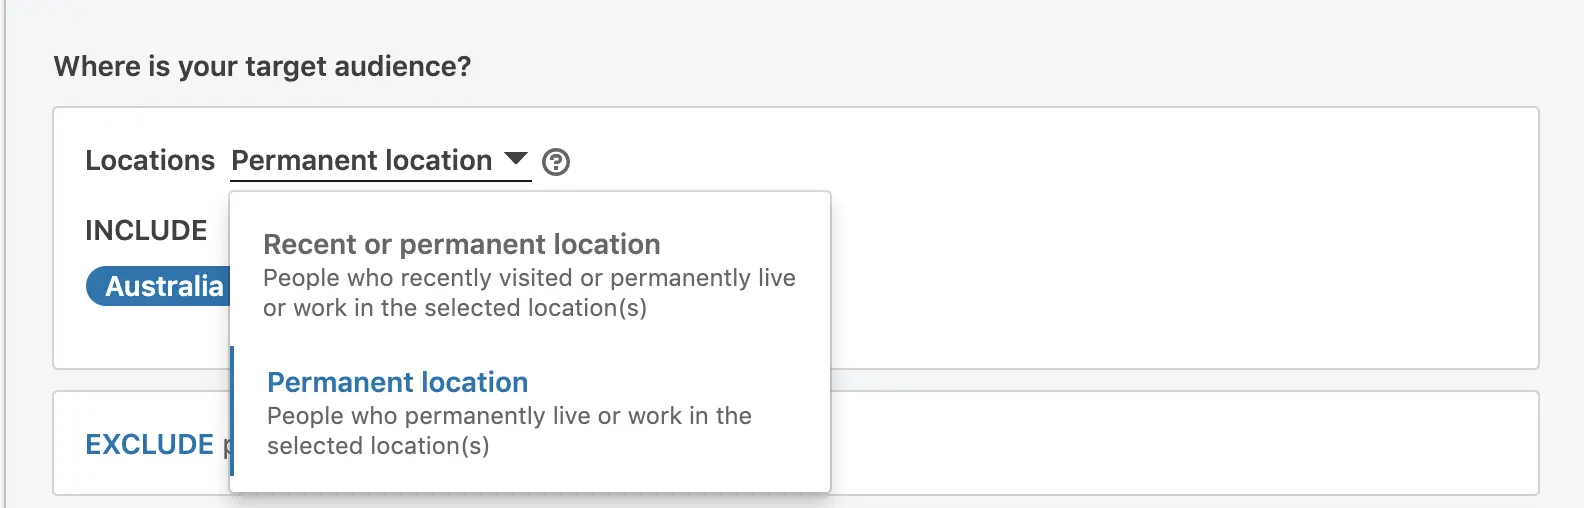 linkedin ads location options recent or permanent